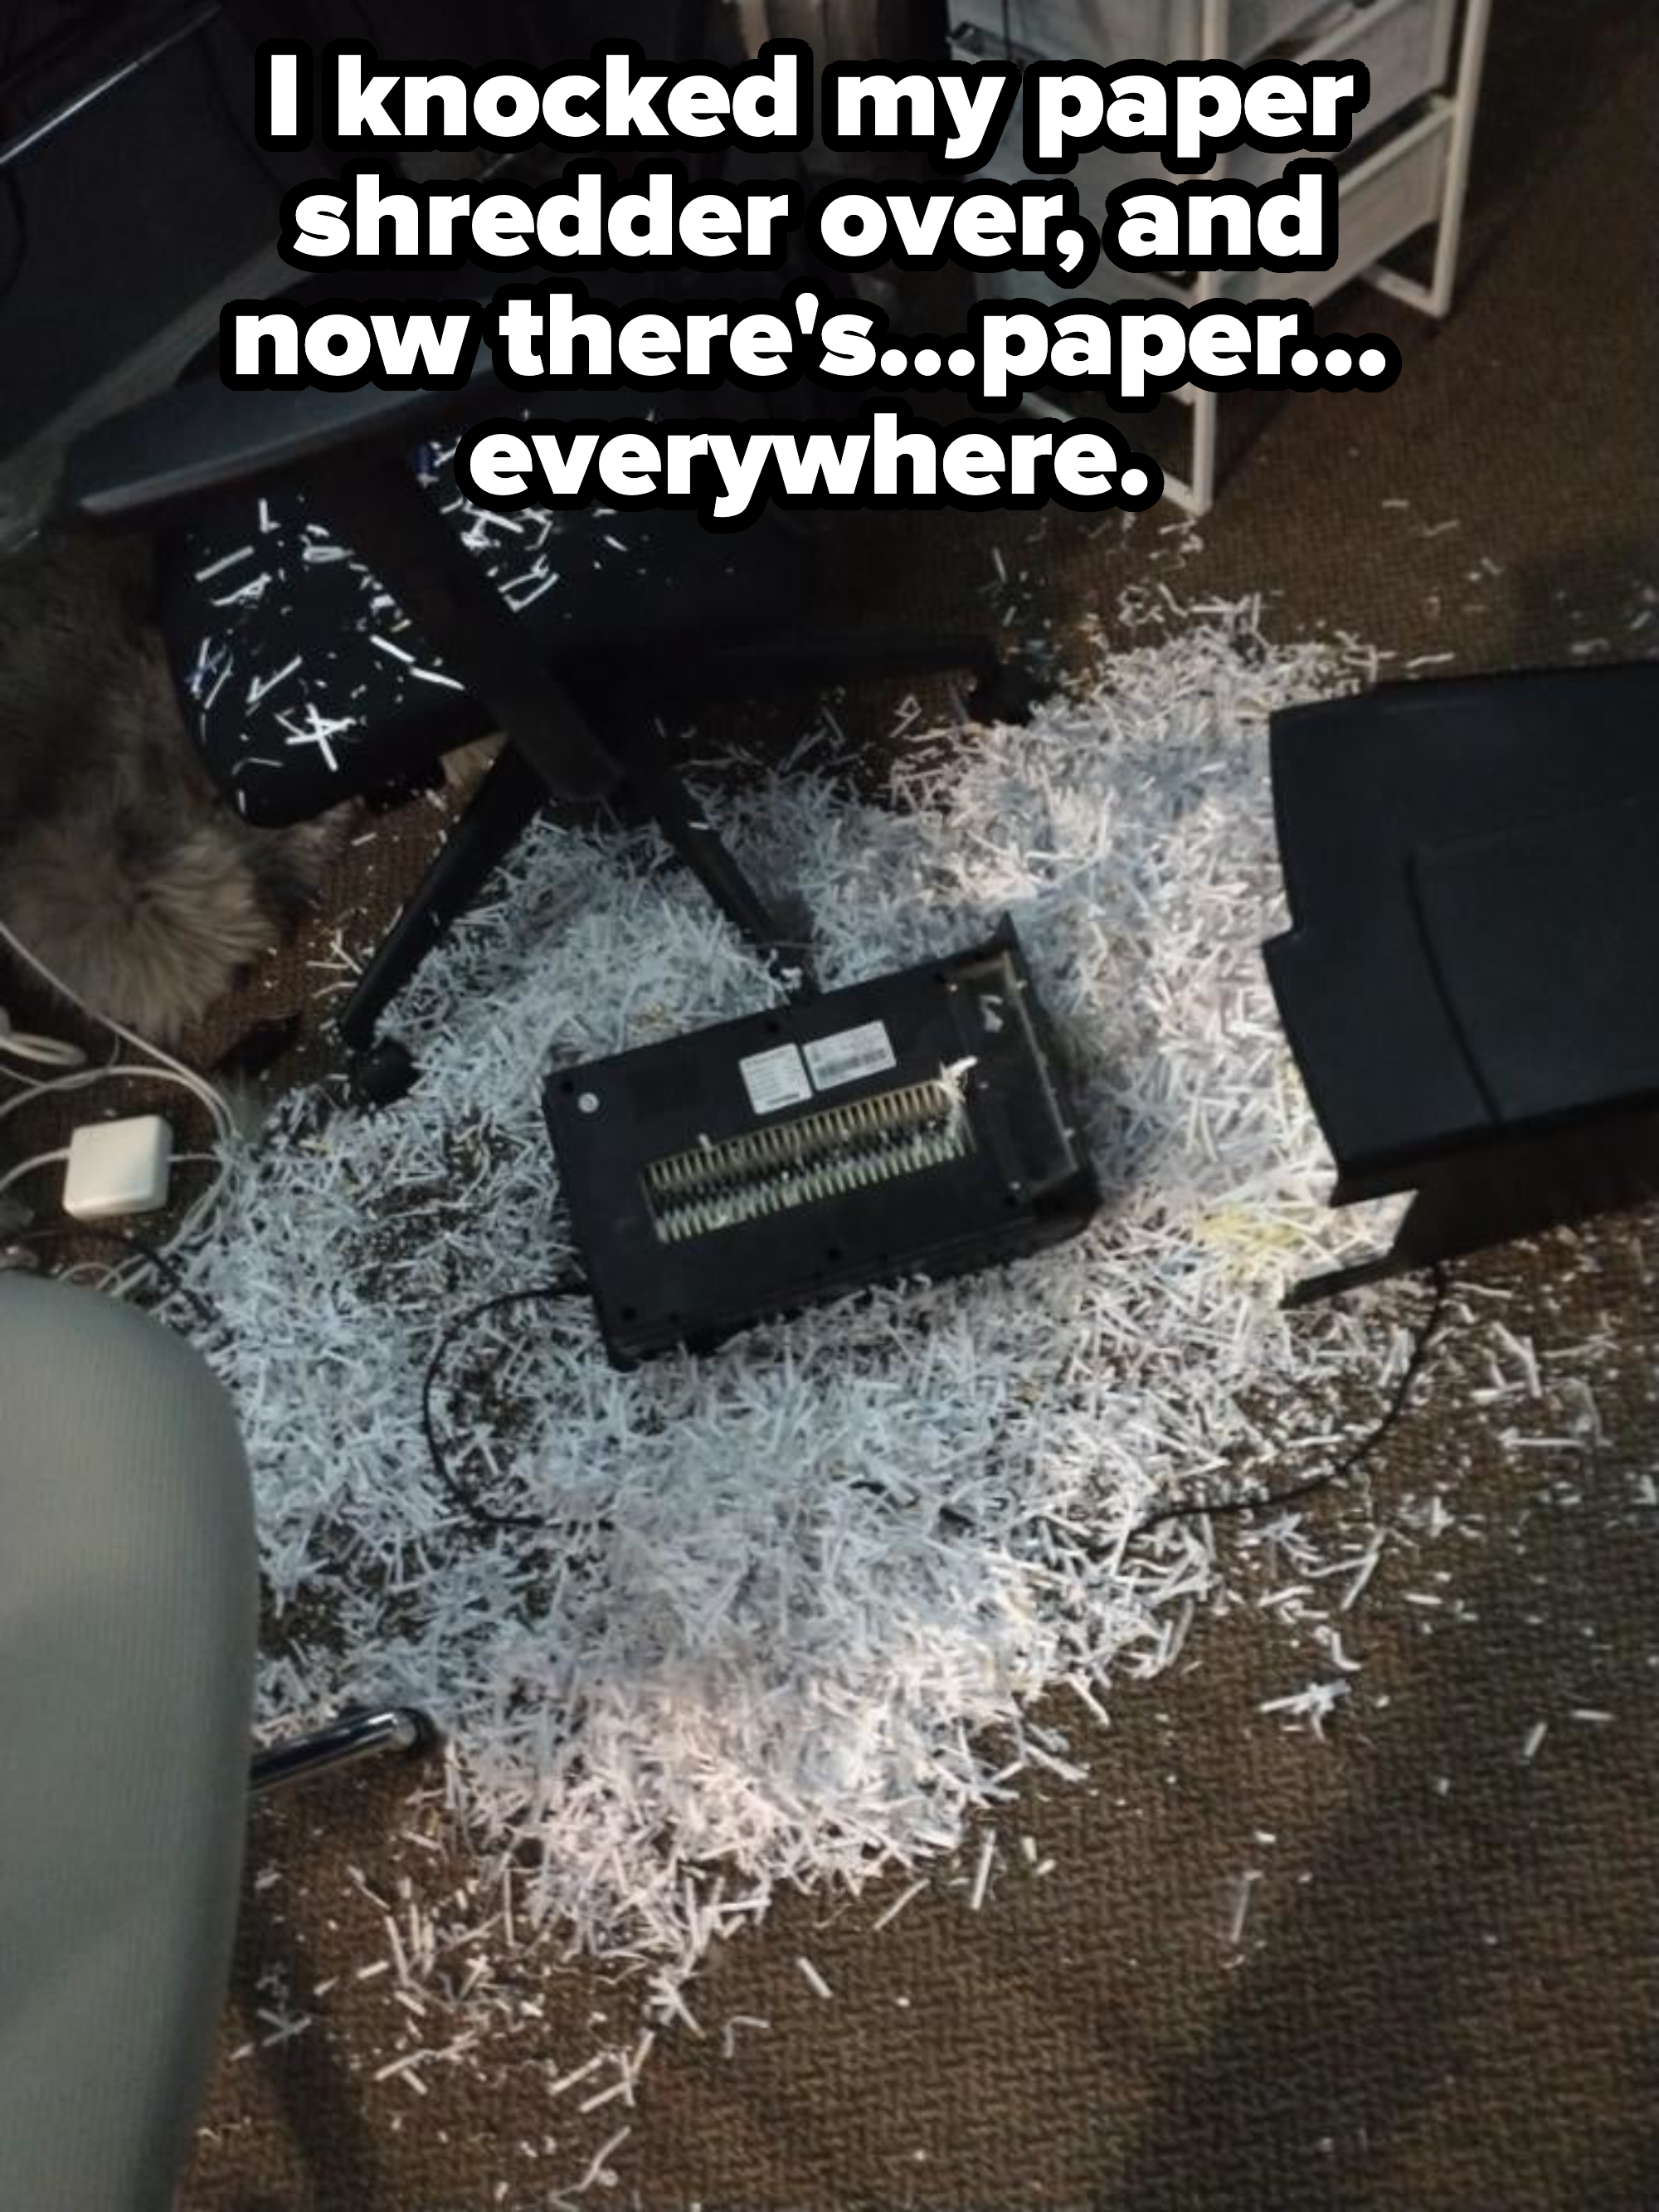 A shredded paper mess on the floor with an overturned shredder and a glimpse of a pet cat